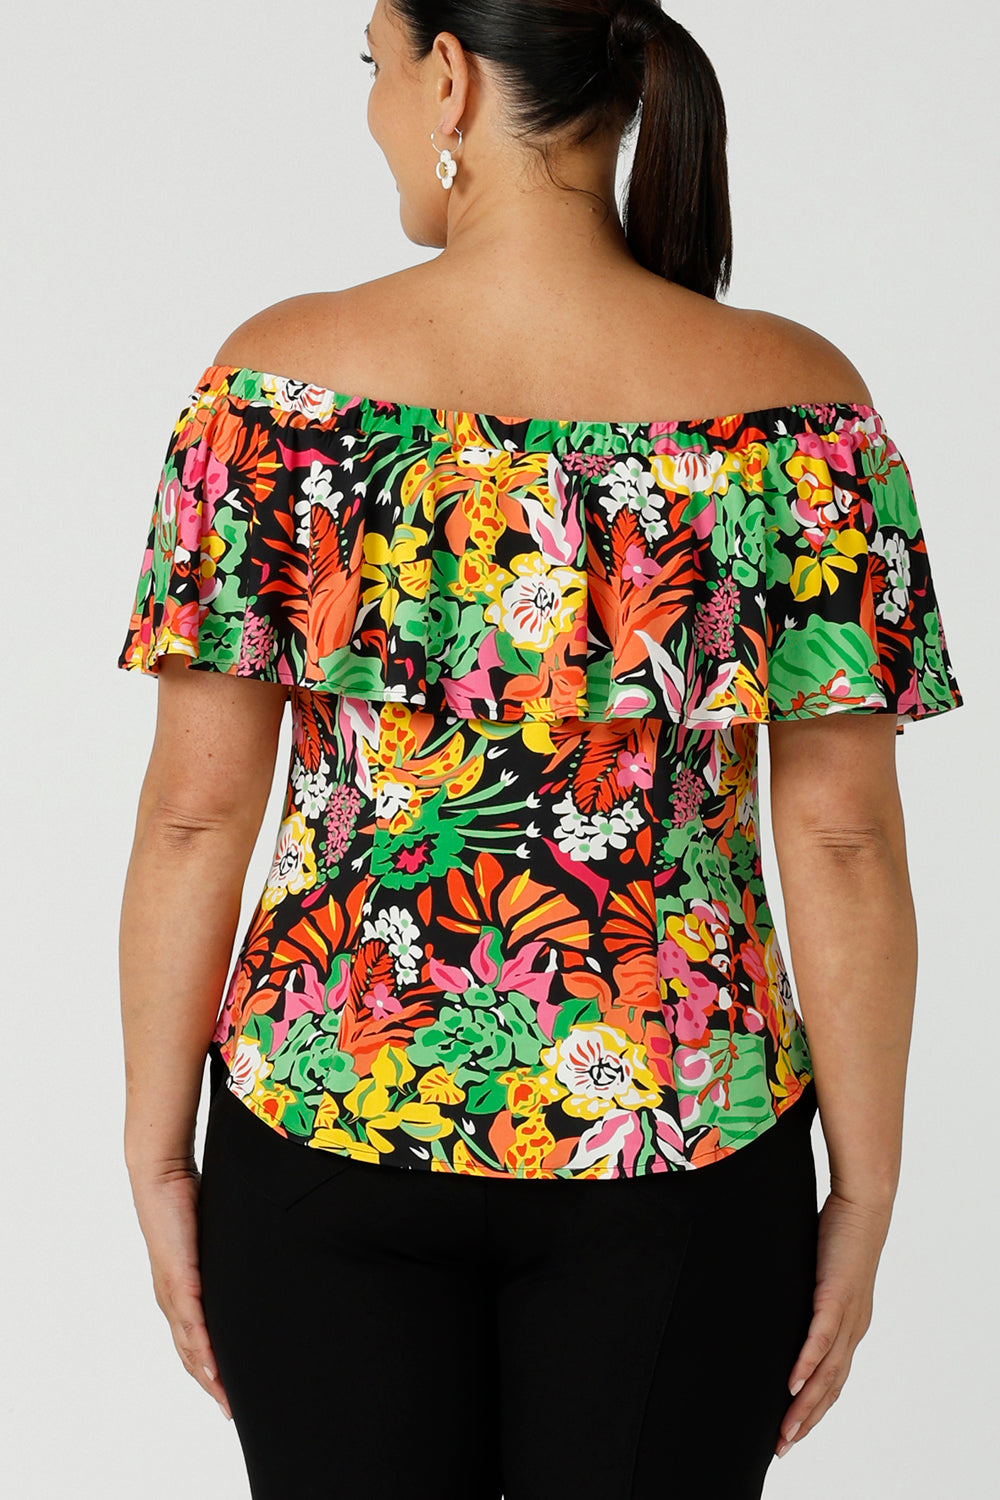 Back view of a size 12 woman wears and off shoulder ruffle Briar top in the Cancun print. A bright and colourful pop of green, pink, orange and yellow floral print. A versatile top for the summer season, wear this top 3 ways. Designed and made in Australia sizes 8-24.